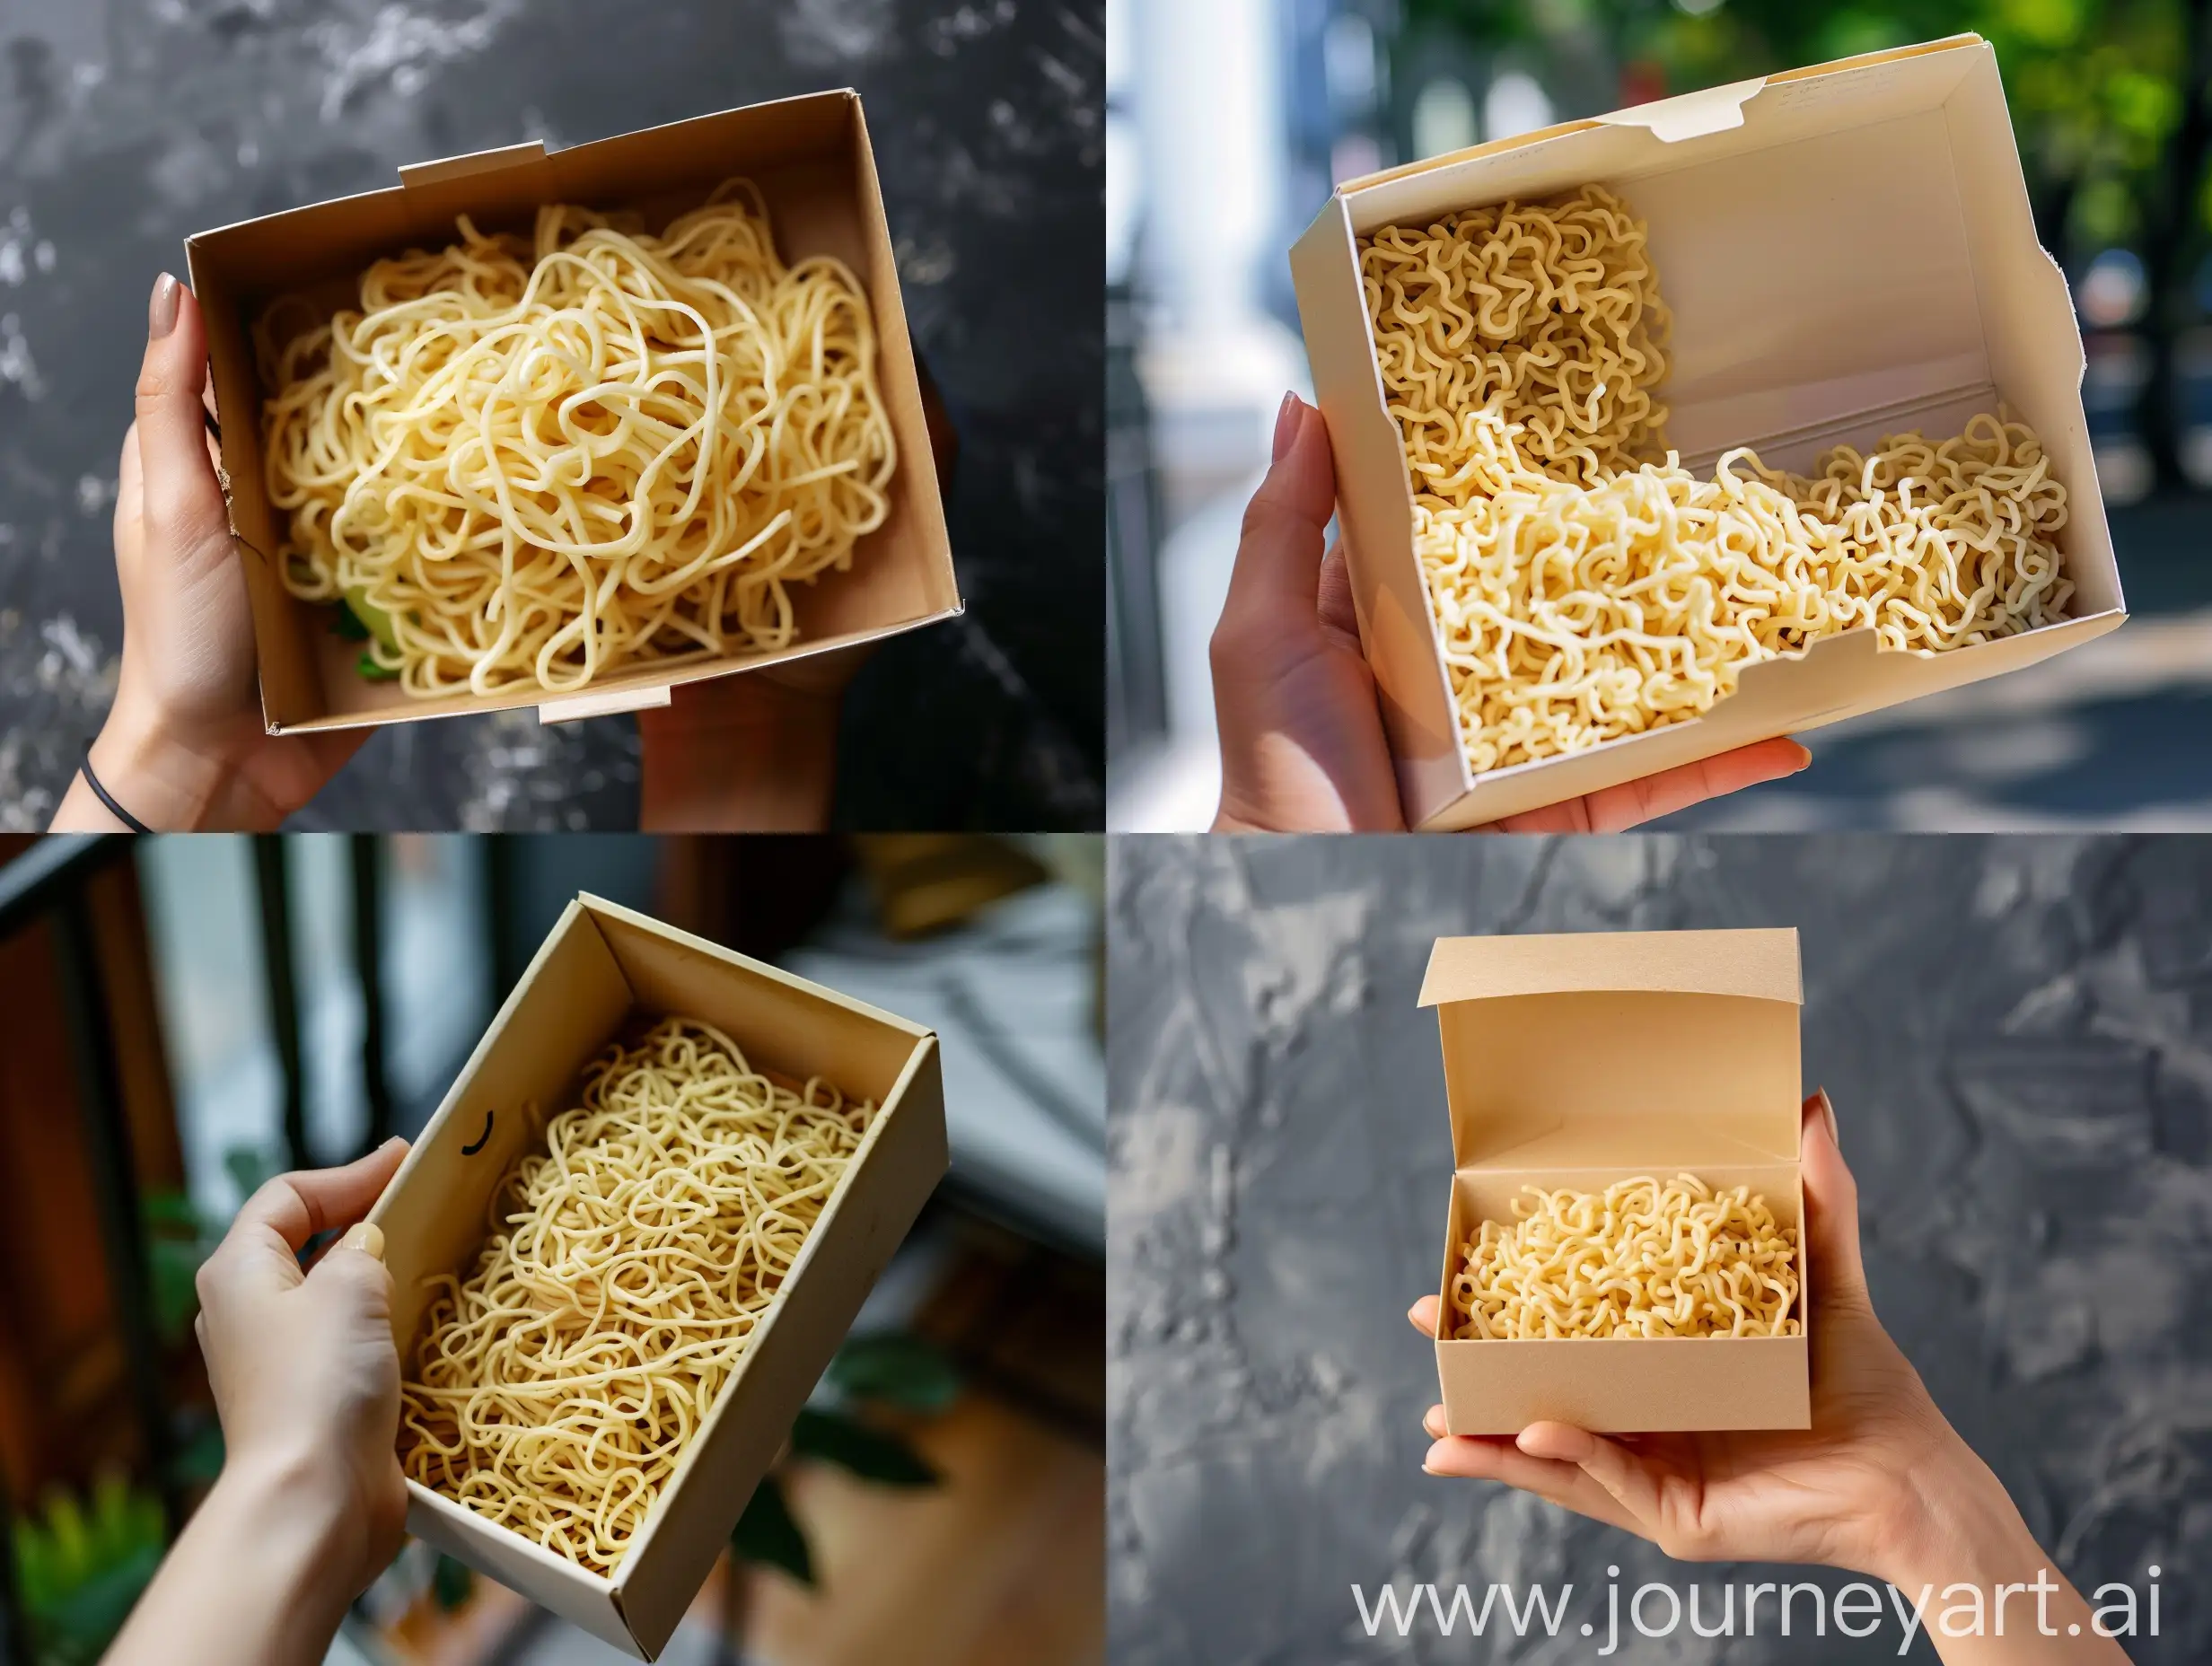 Asian-Cuisine-Woman-Holding-a-Box-of-Noodles